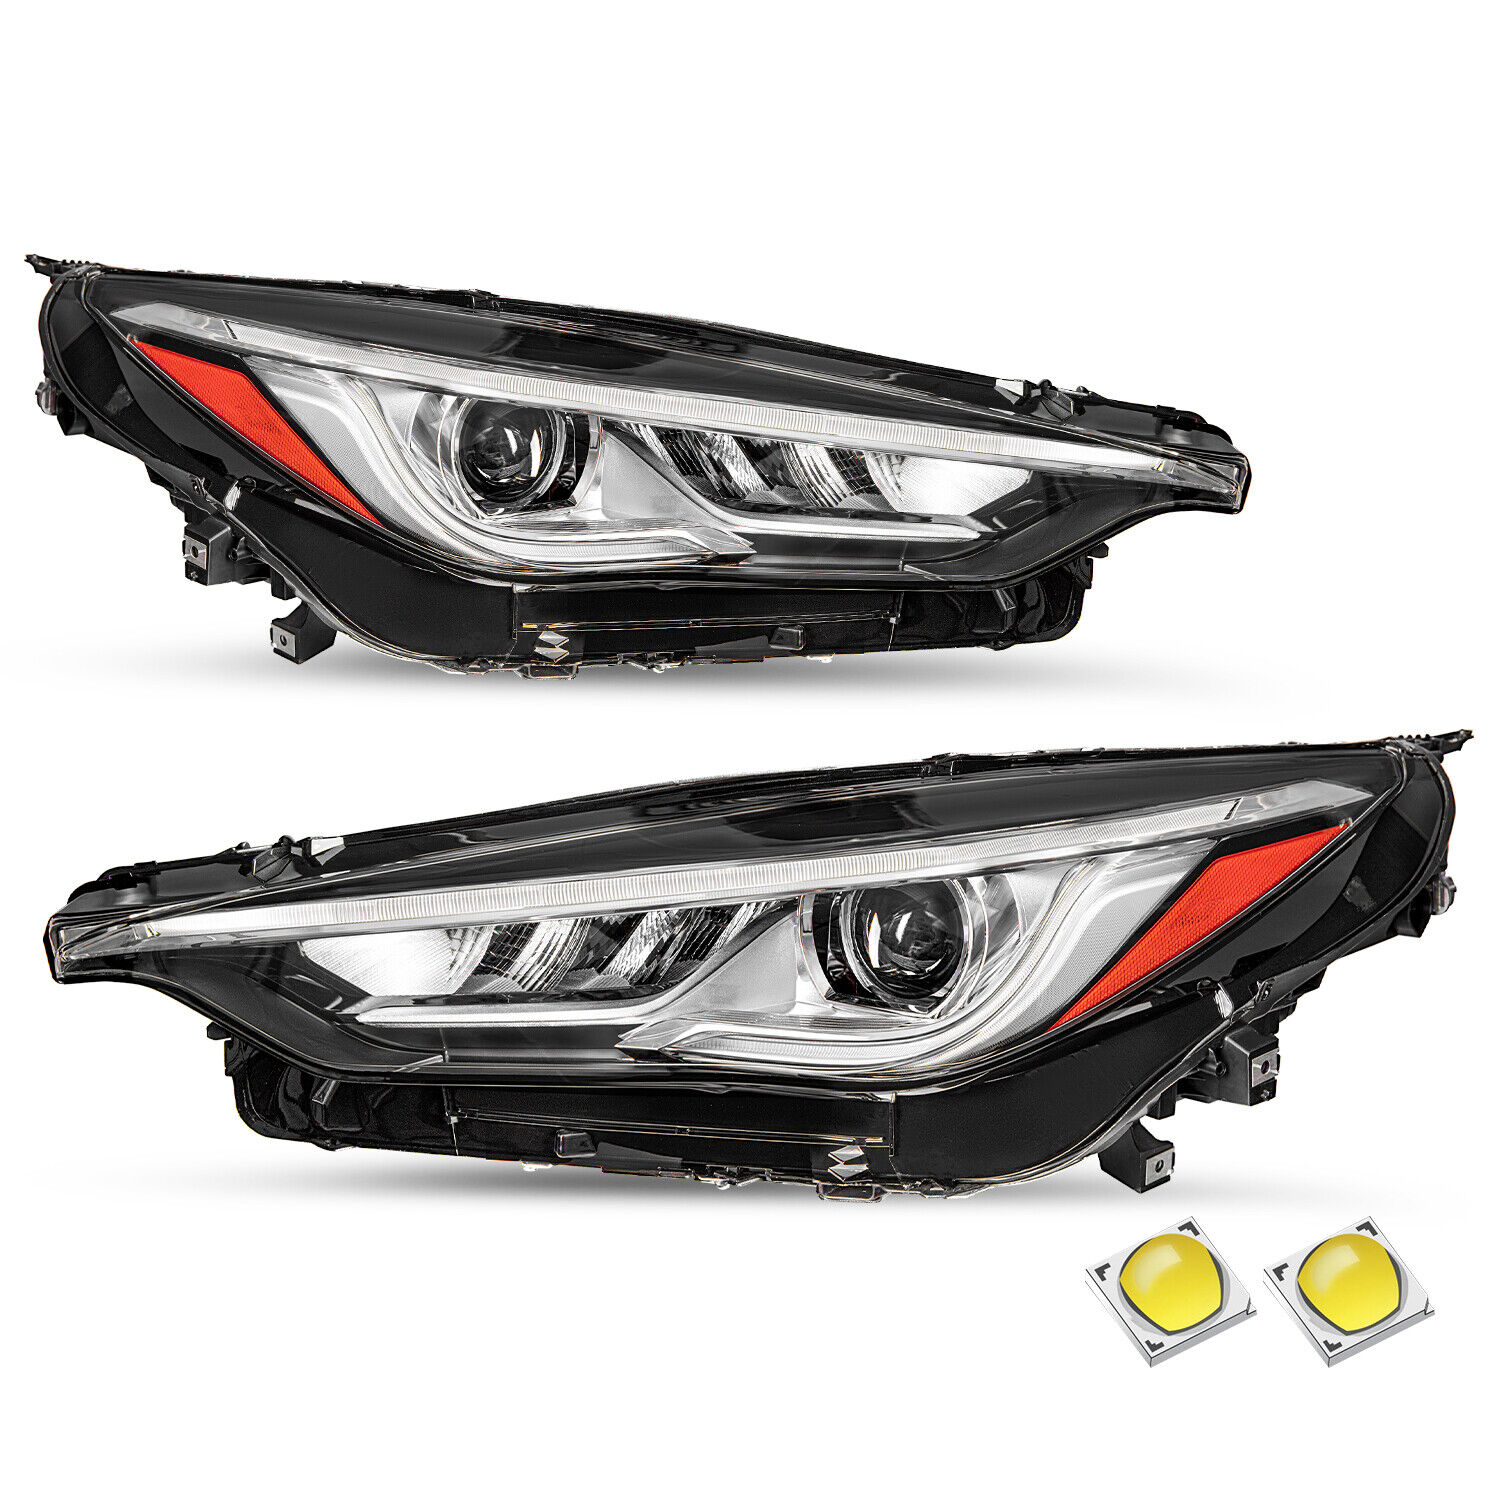 For 2019-2021 Infiniti QX50 Full LED Headlights Assembly Headlamps w/o AFS Pair